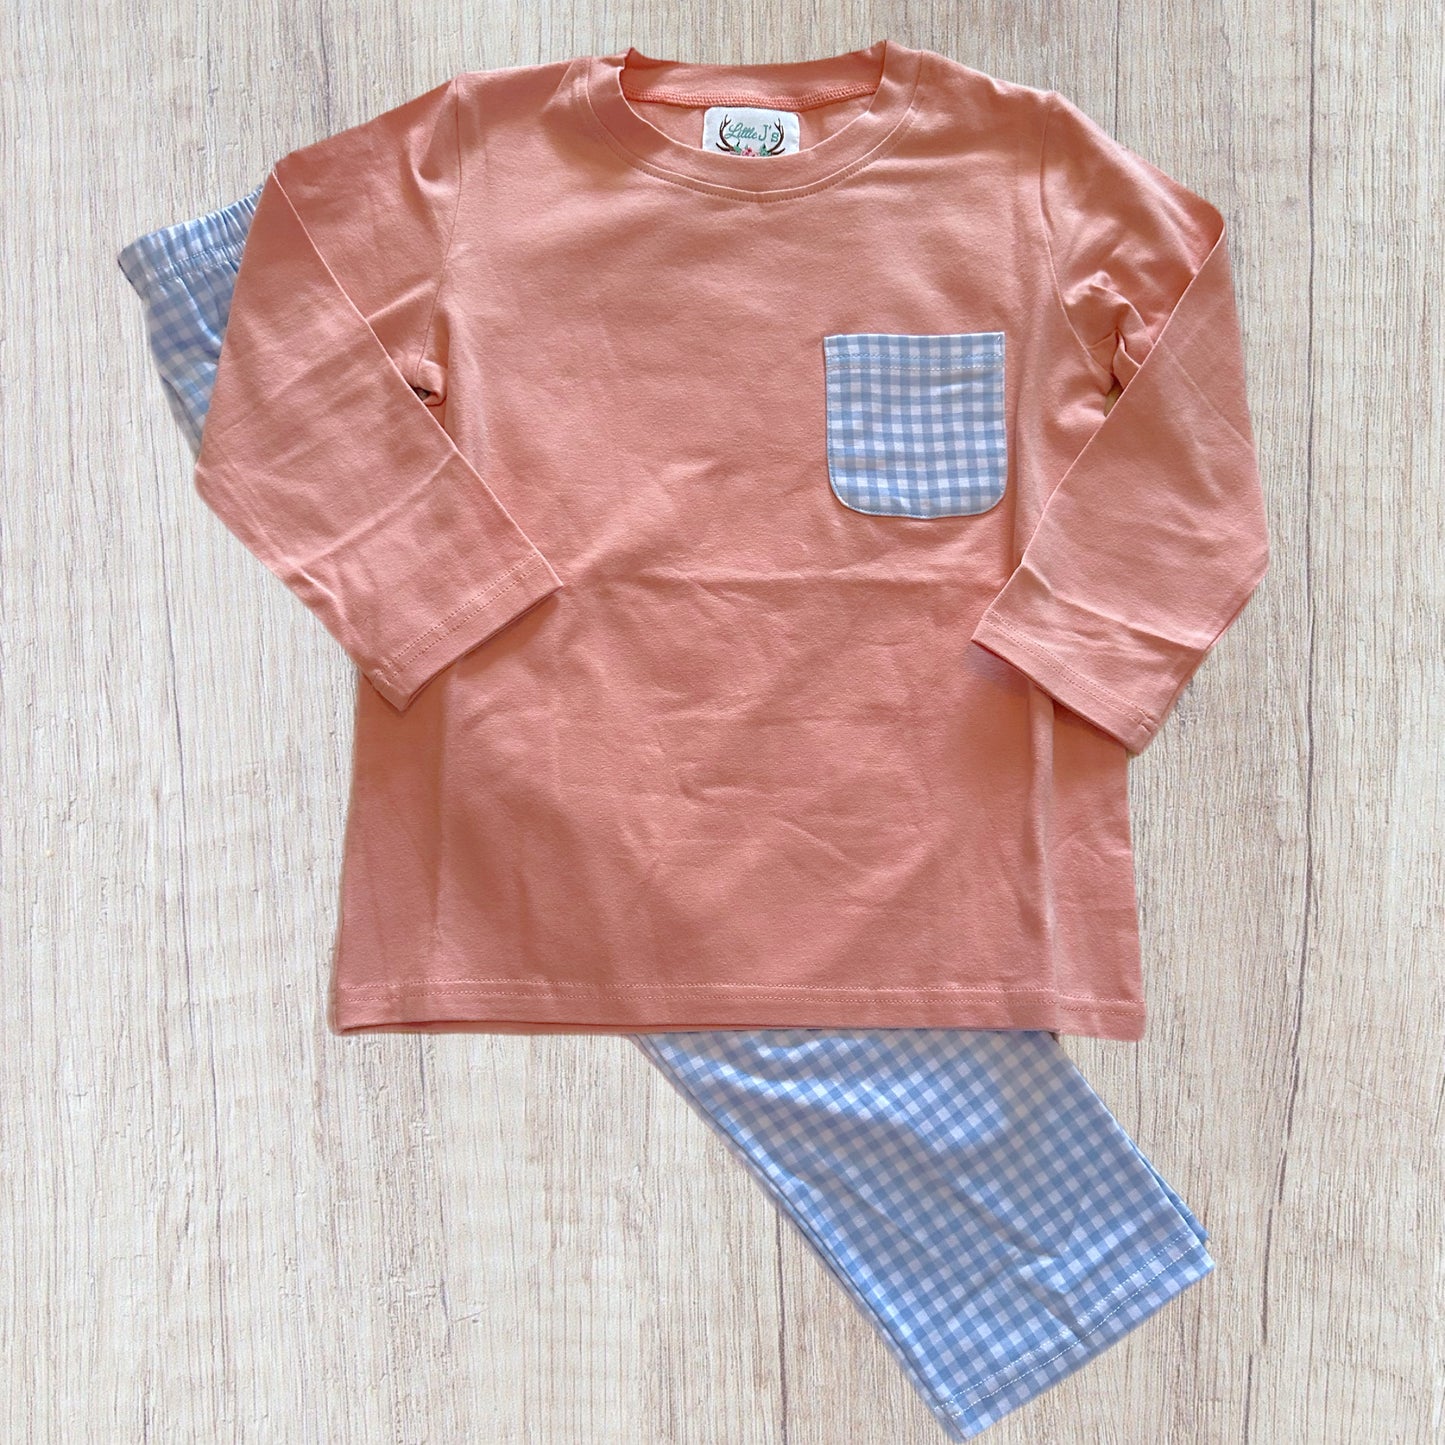 5/6 Peach and Blue Gingham Boys Pant Set (RTS)